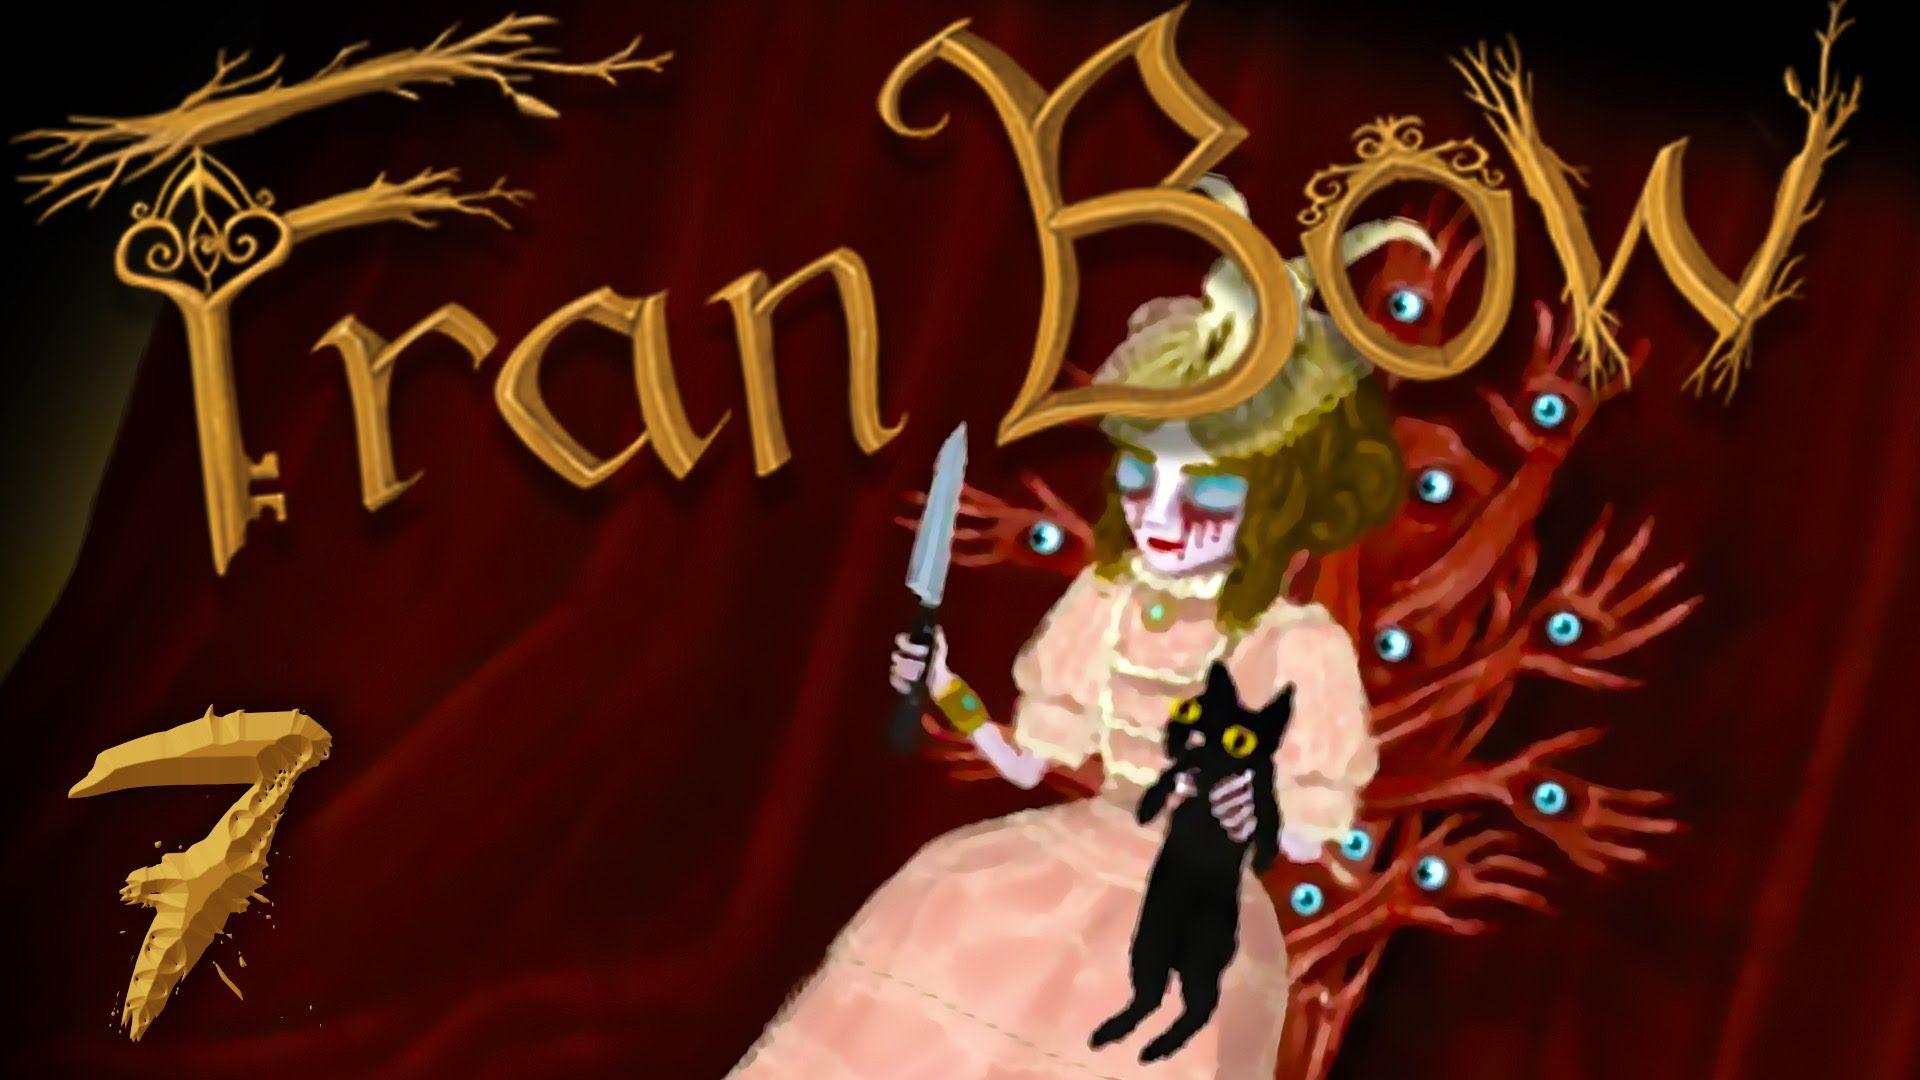 Fran Bow. Part 7. OUR IMAGINARY FRIEND